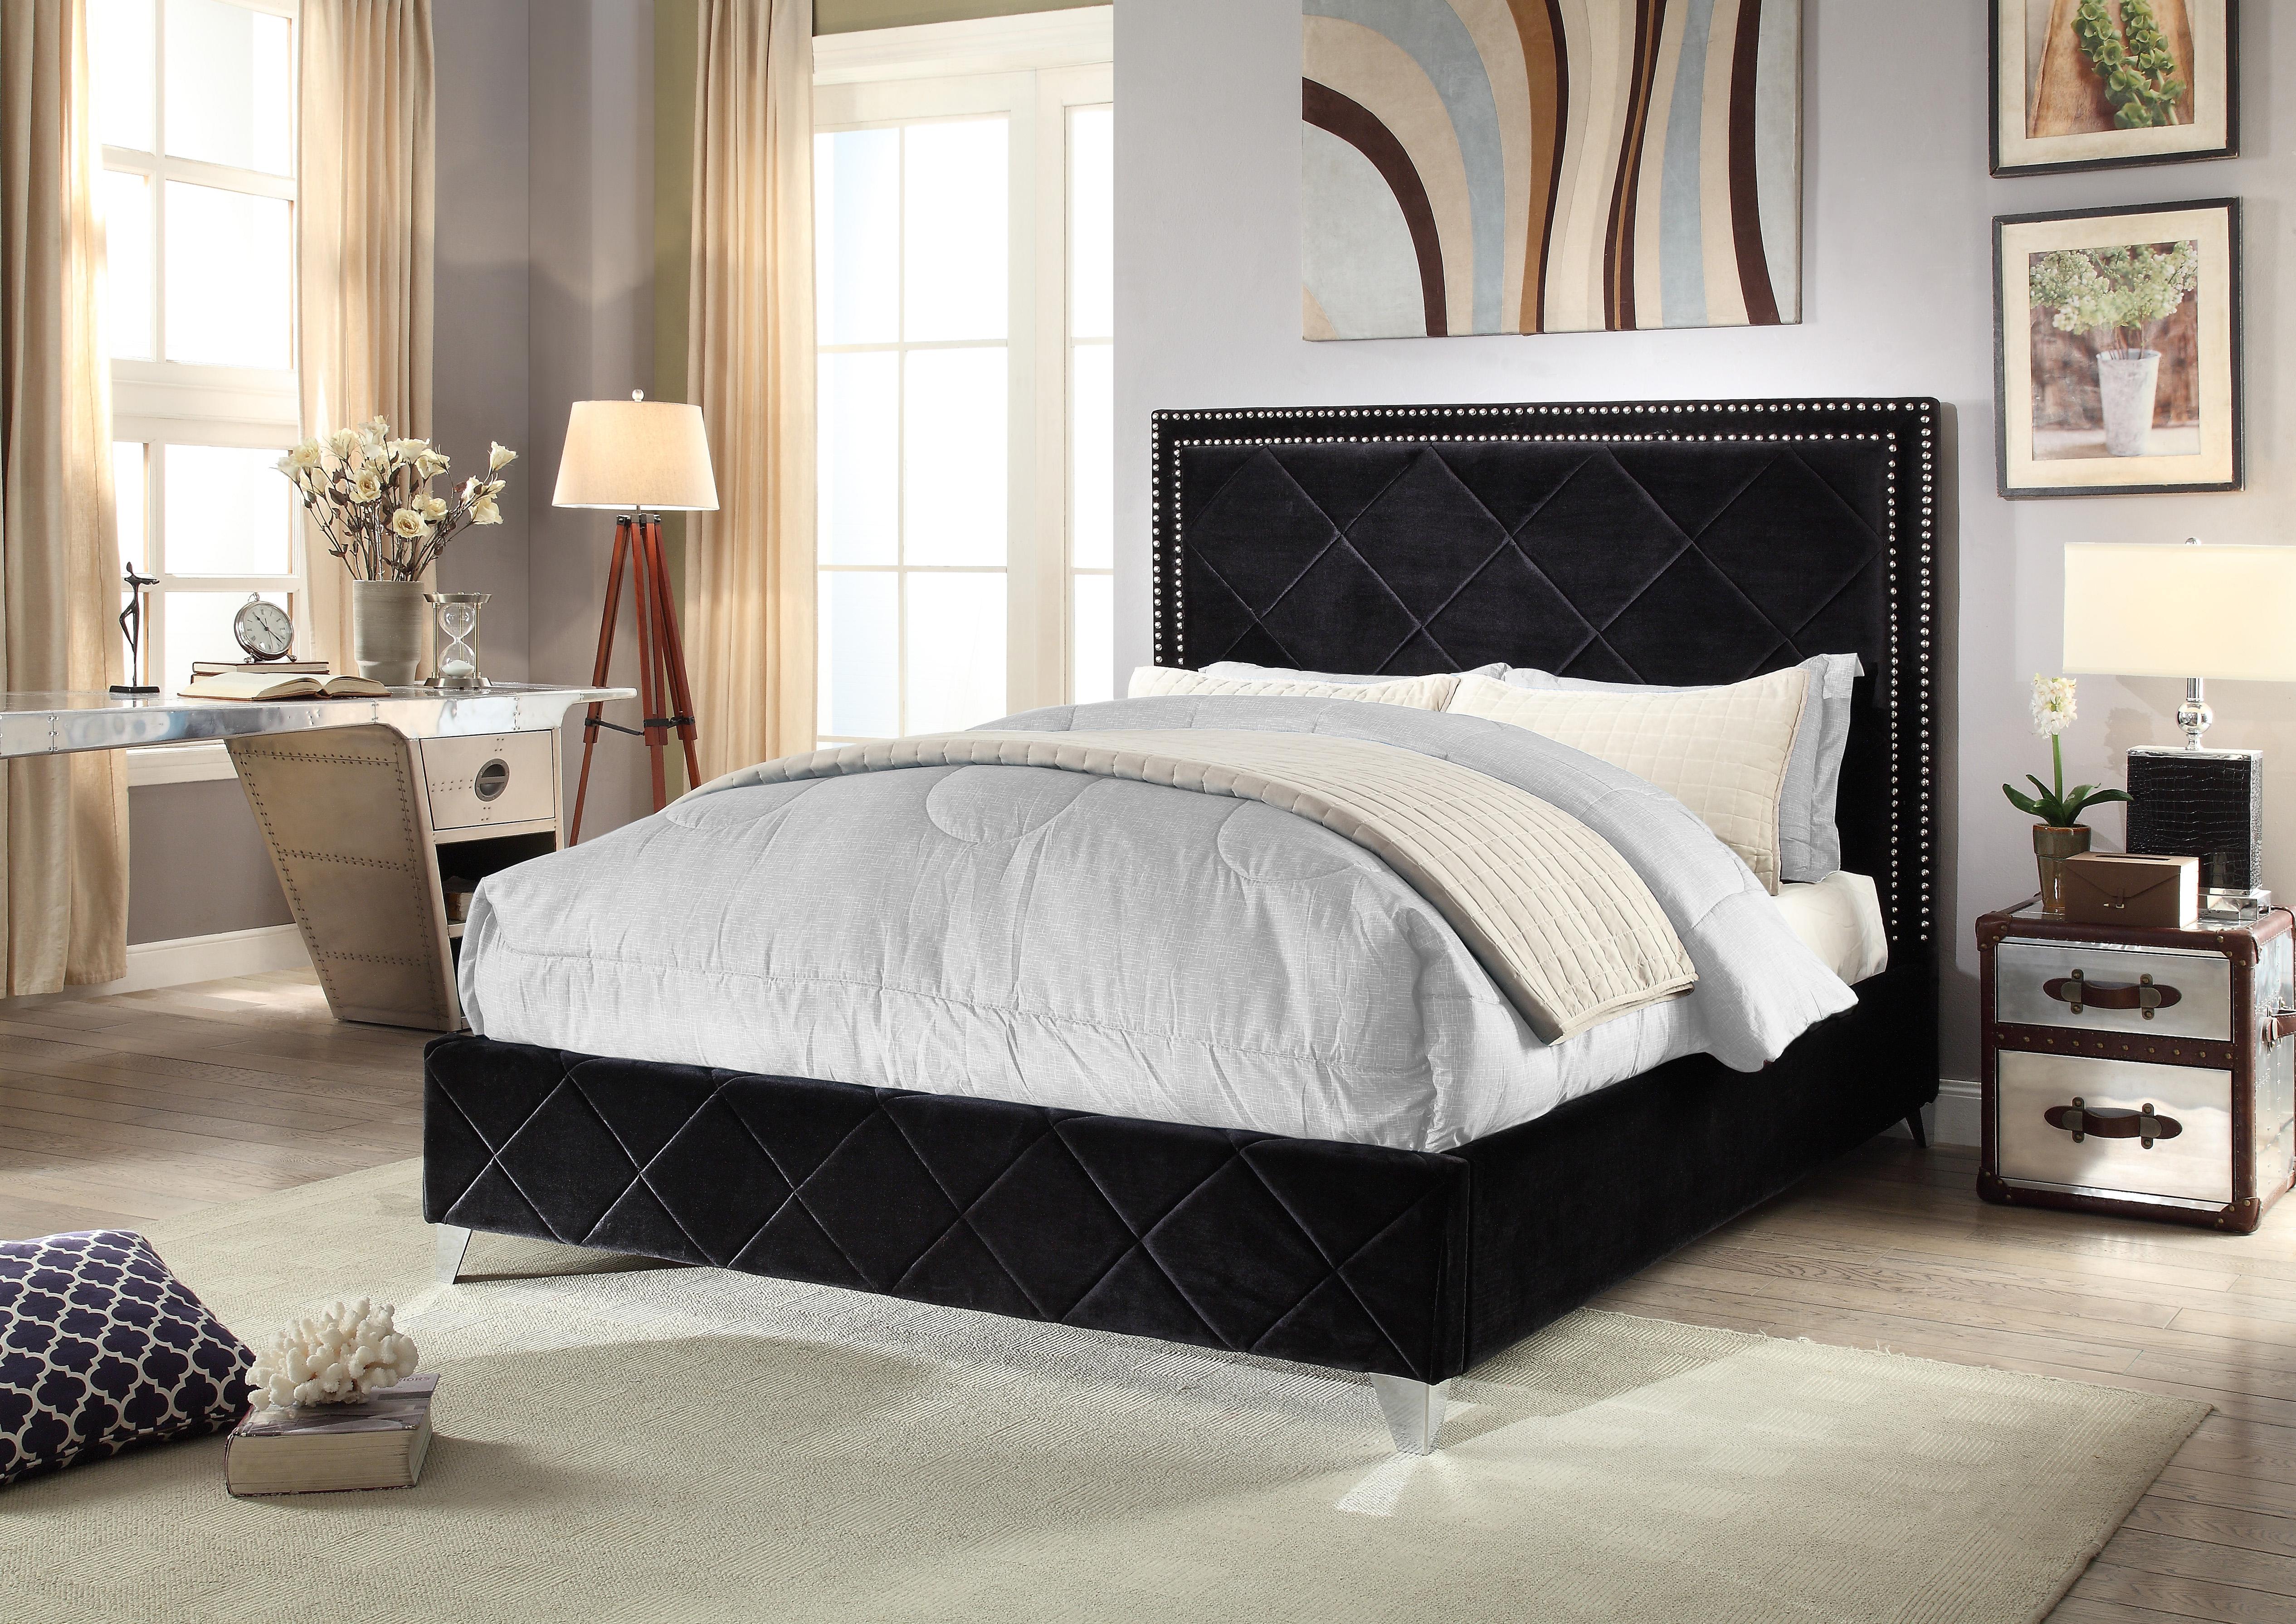 

    
Meridian Hampton King Size Bed in Black Chrome Nailheads Contemporary Style
